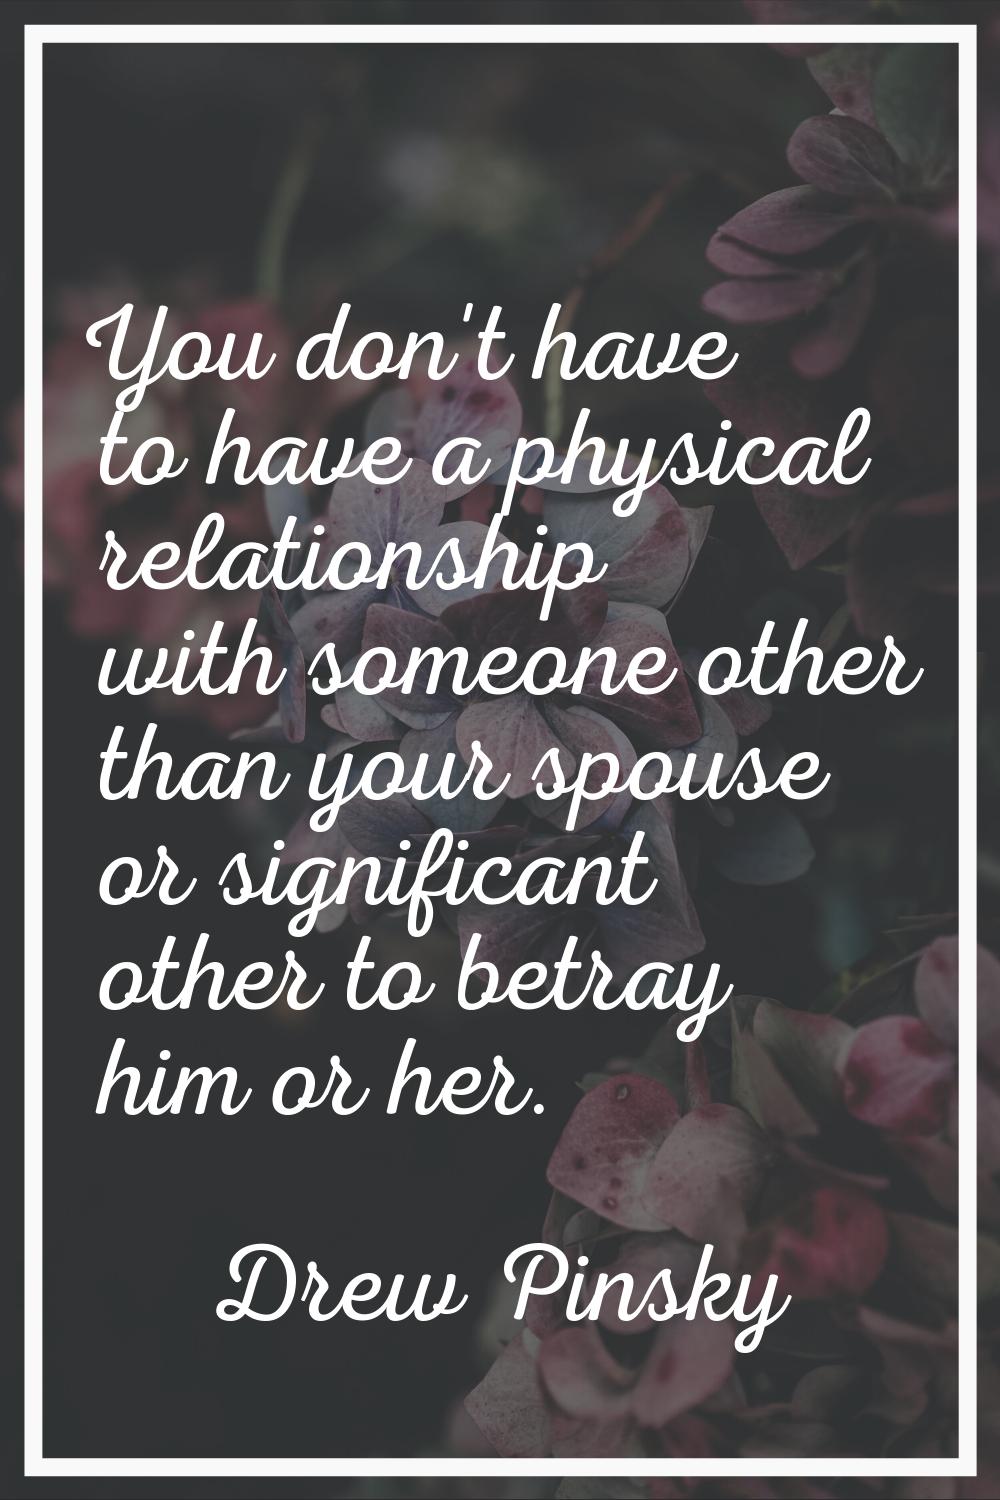 You don't have to have a physical relationship with someone other than your spouse or significant o